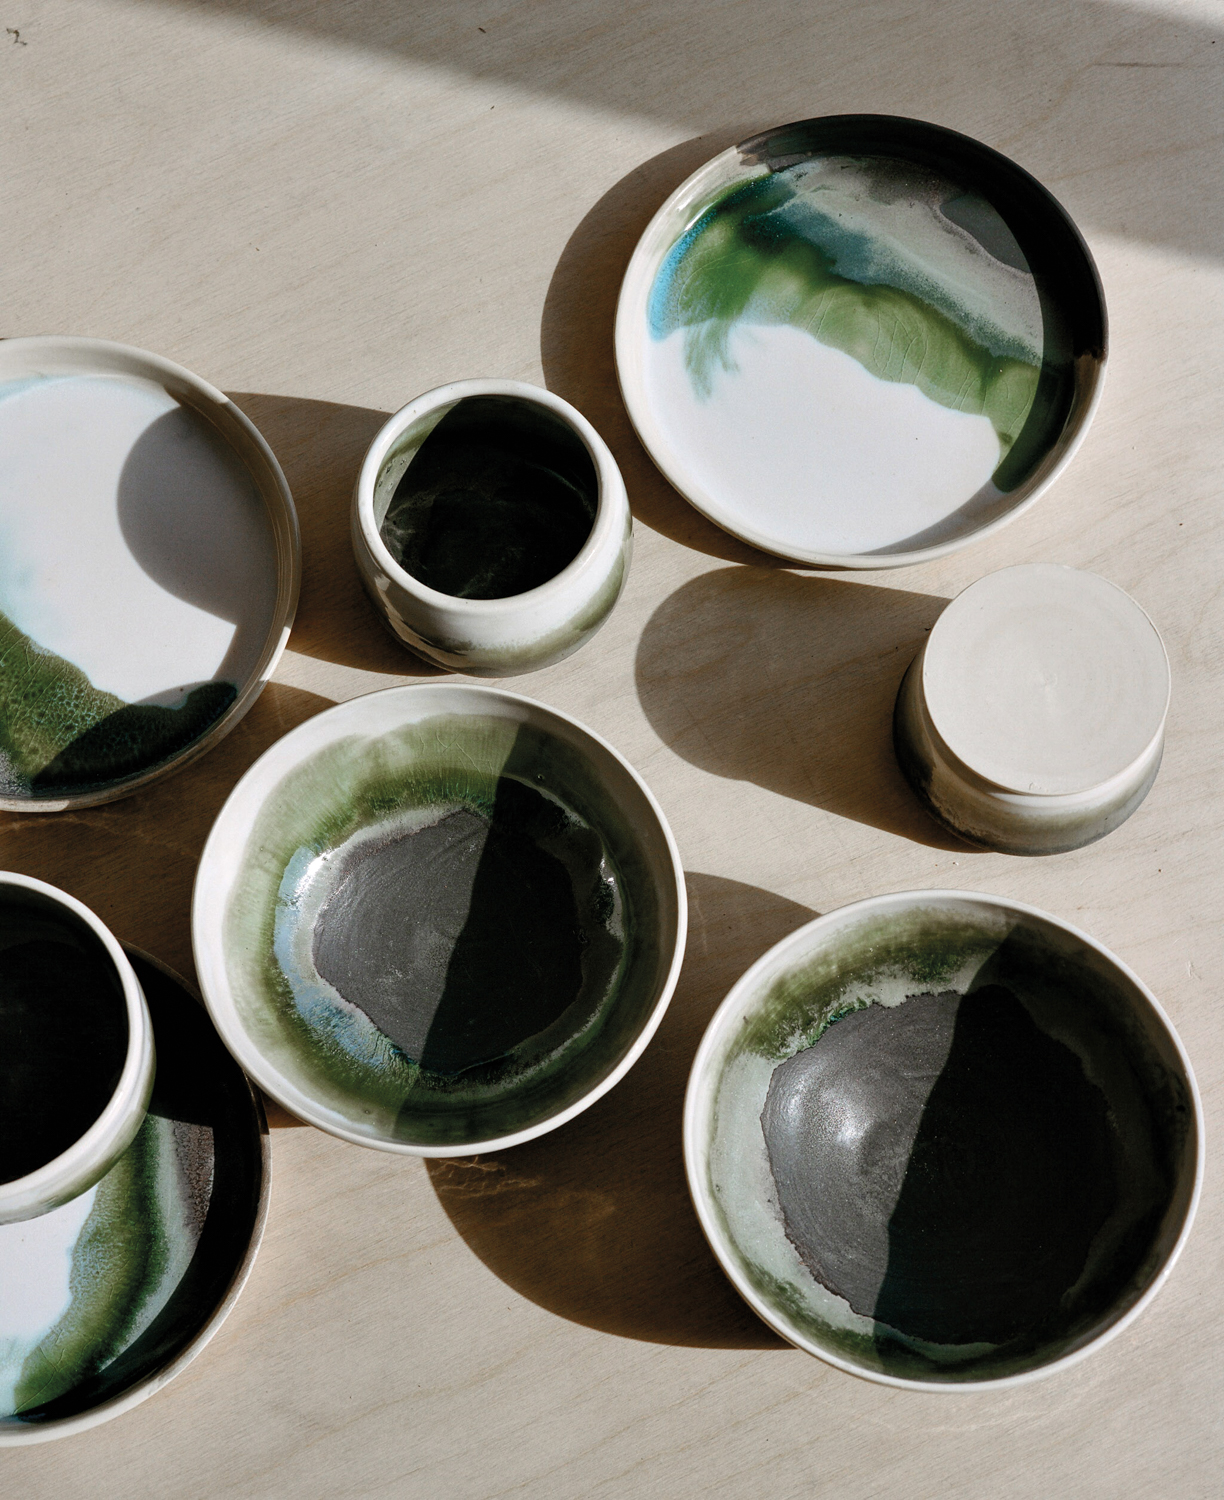 Ceramic bowls, plates and cups by OWIU goods on a table